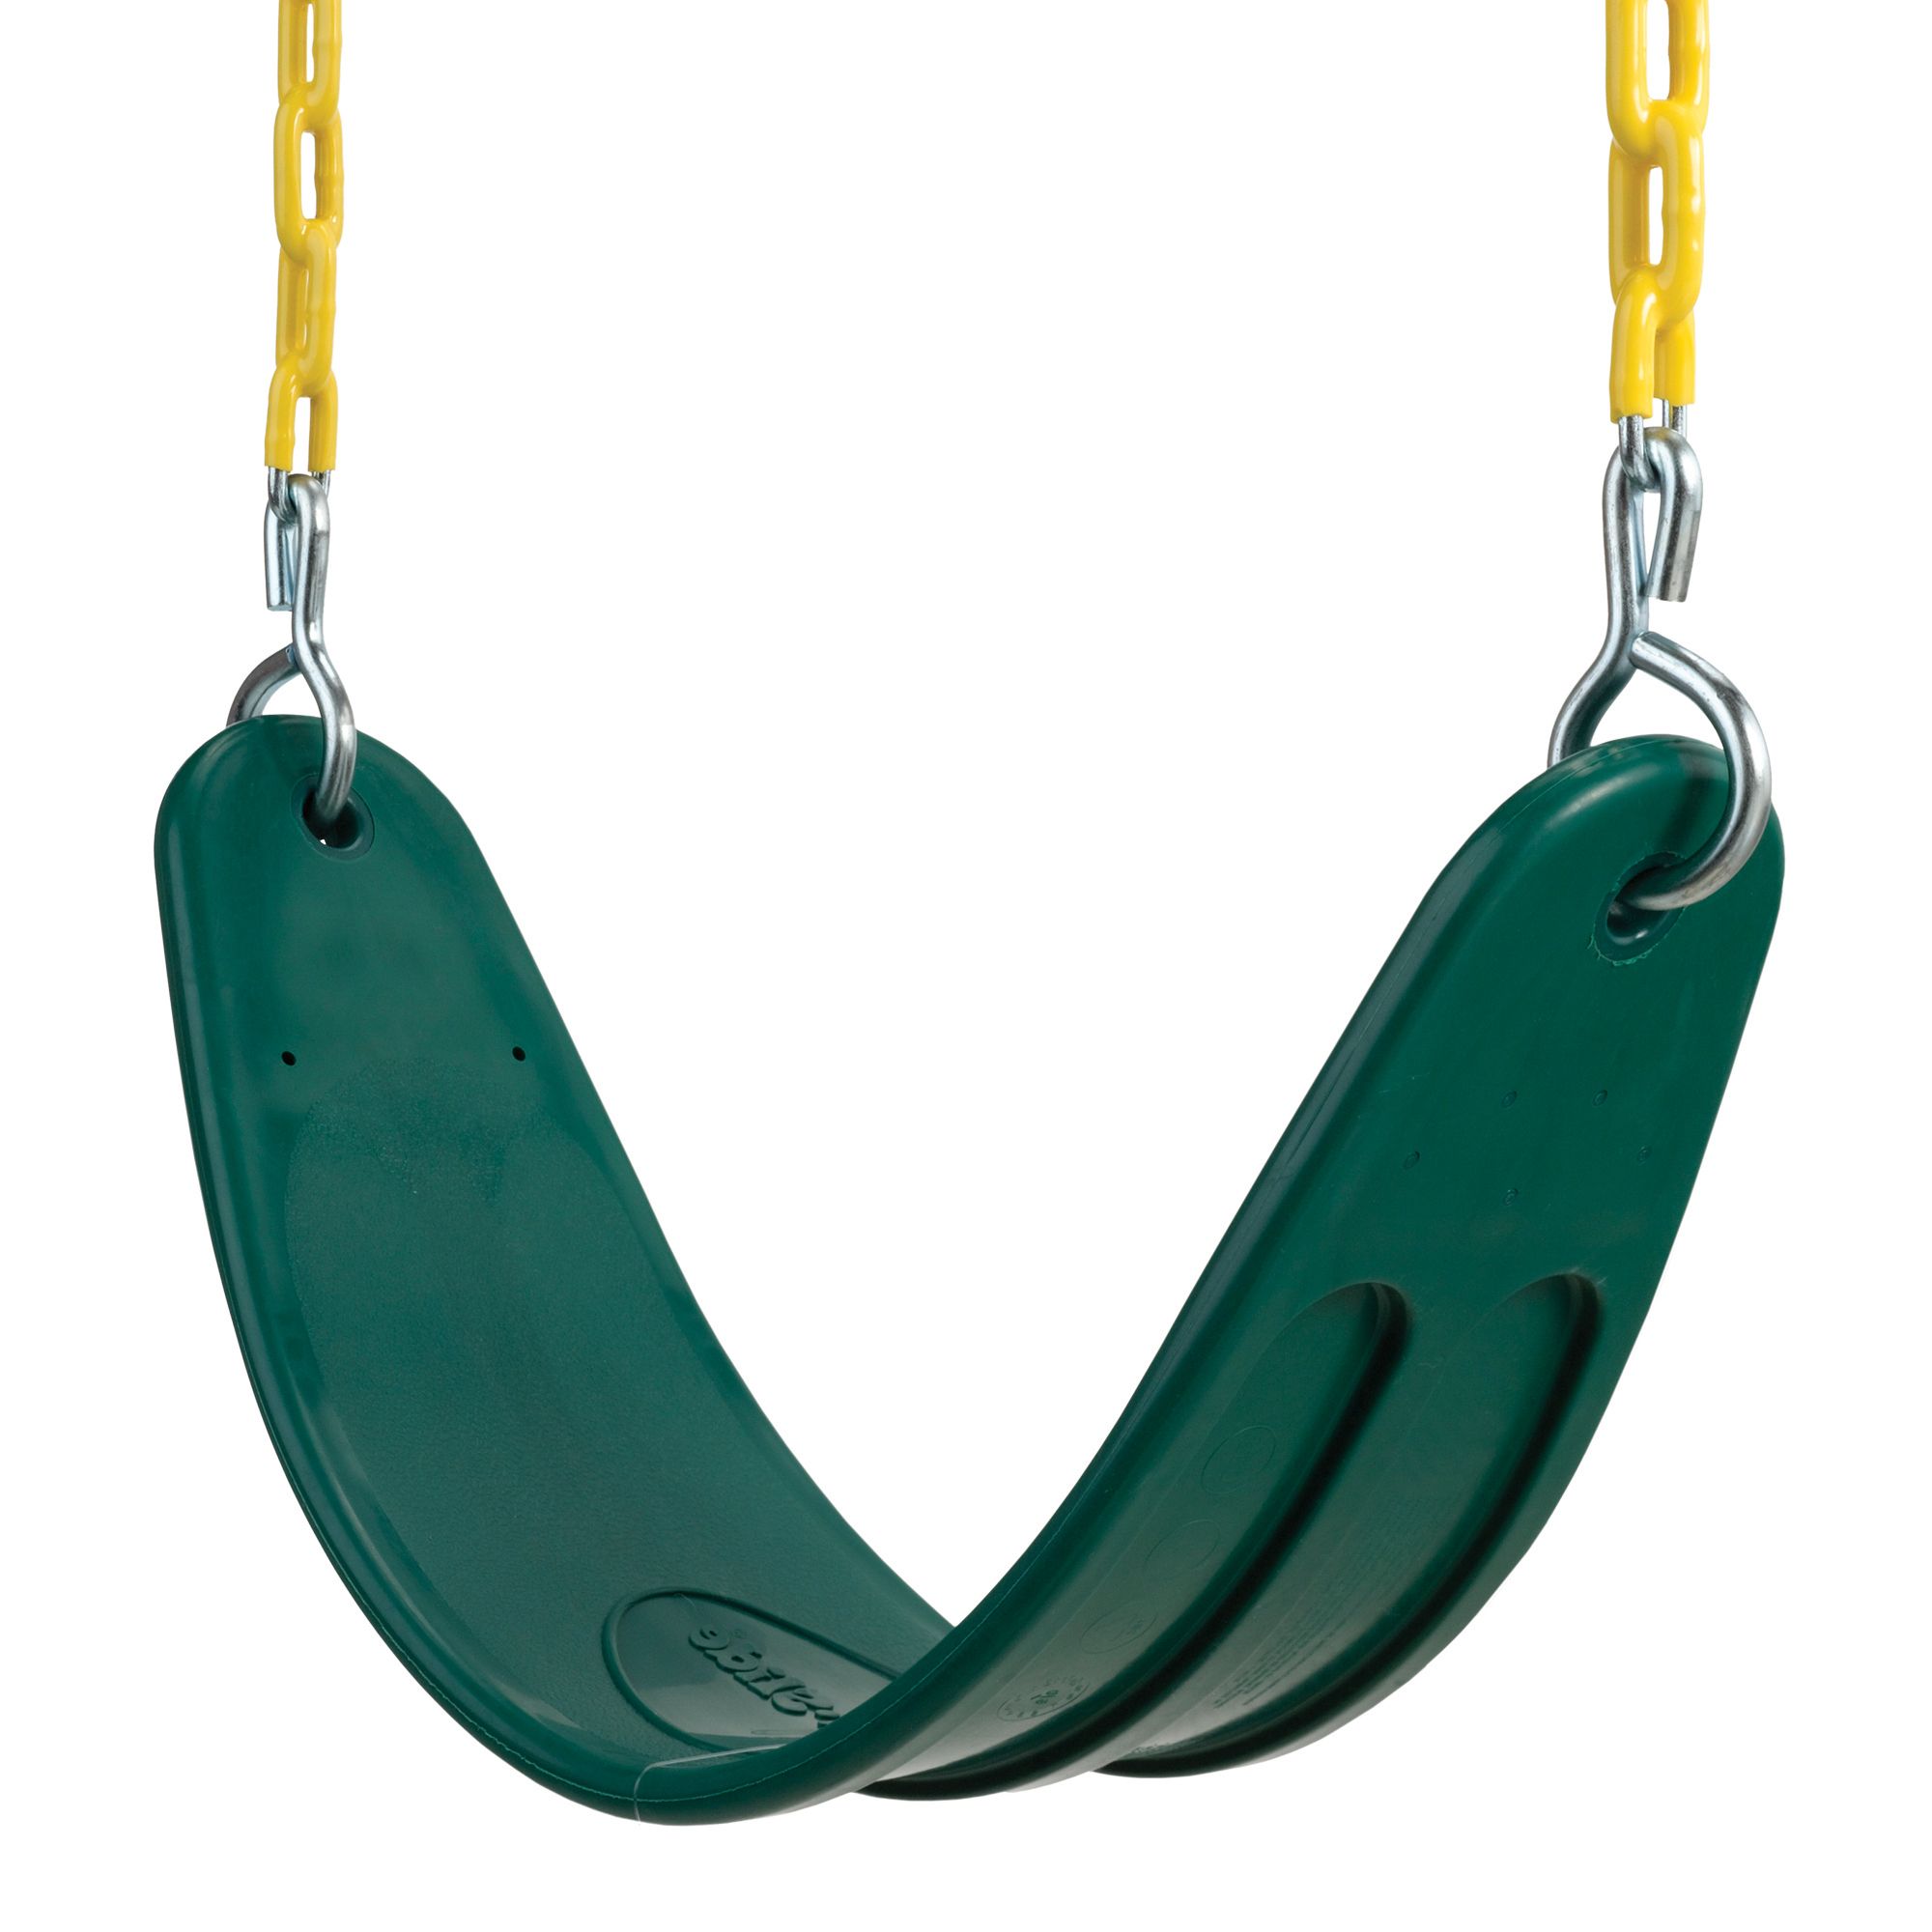 Favorite Swing N Slide Extra Duty Green Swing Seat With Coated Chains – Walmart Throughout Swing Seats With Chains (View 5 of 30)